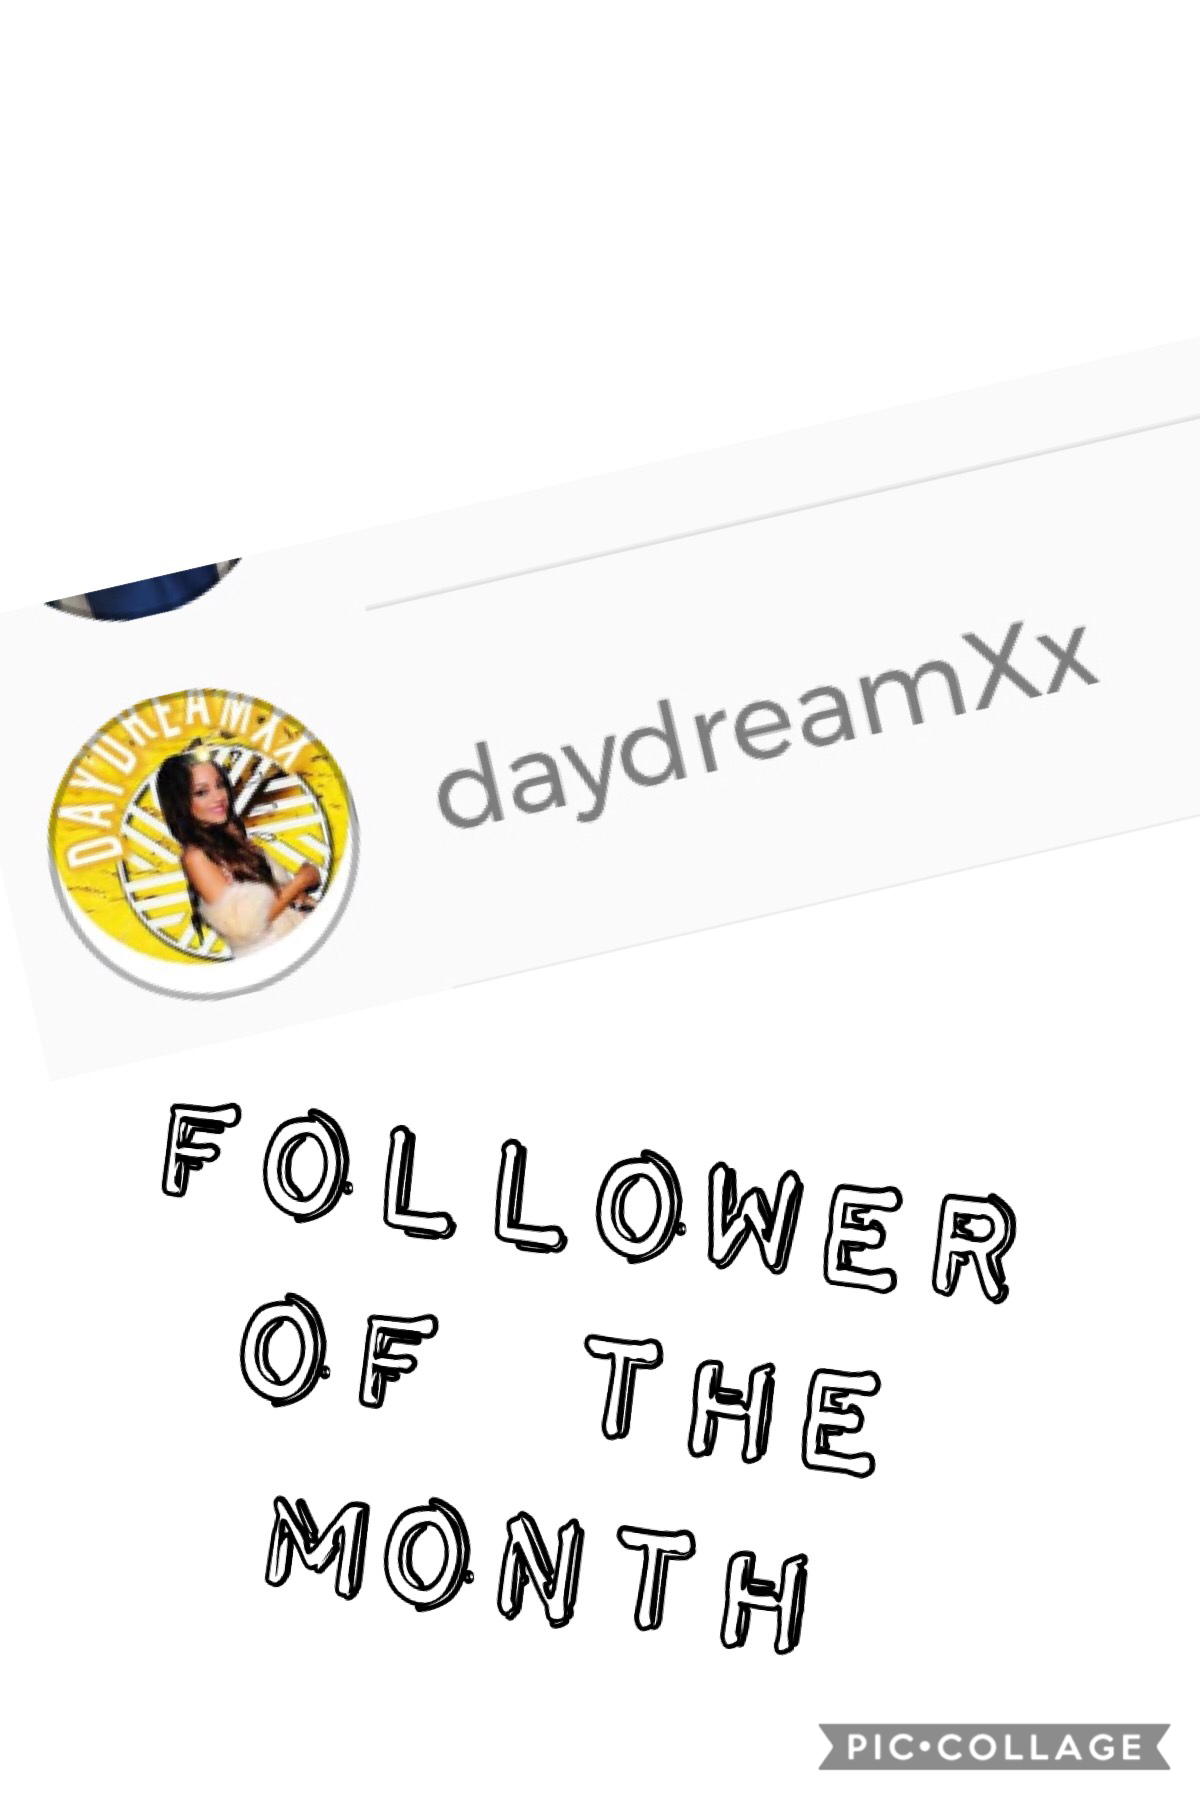 daydreamXx is the follower of the month and gets a free shoutout go follow her😝